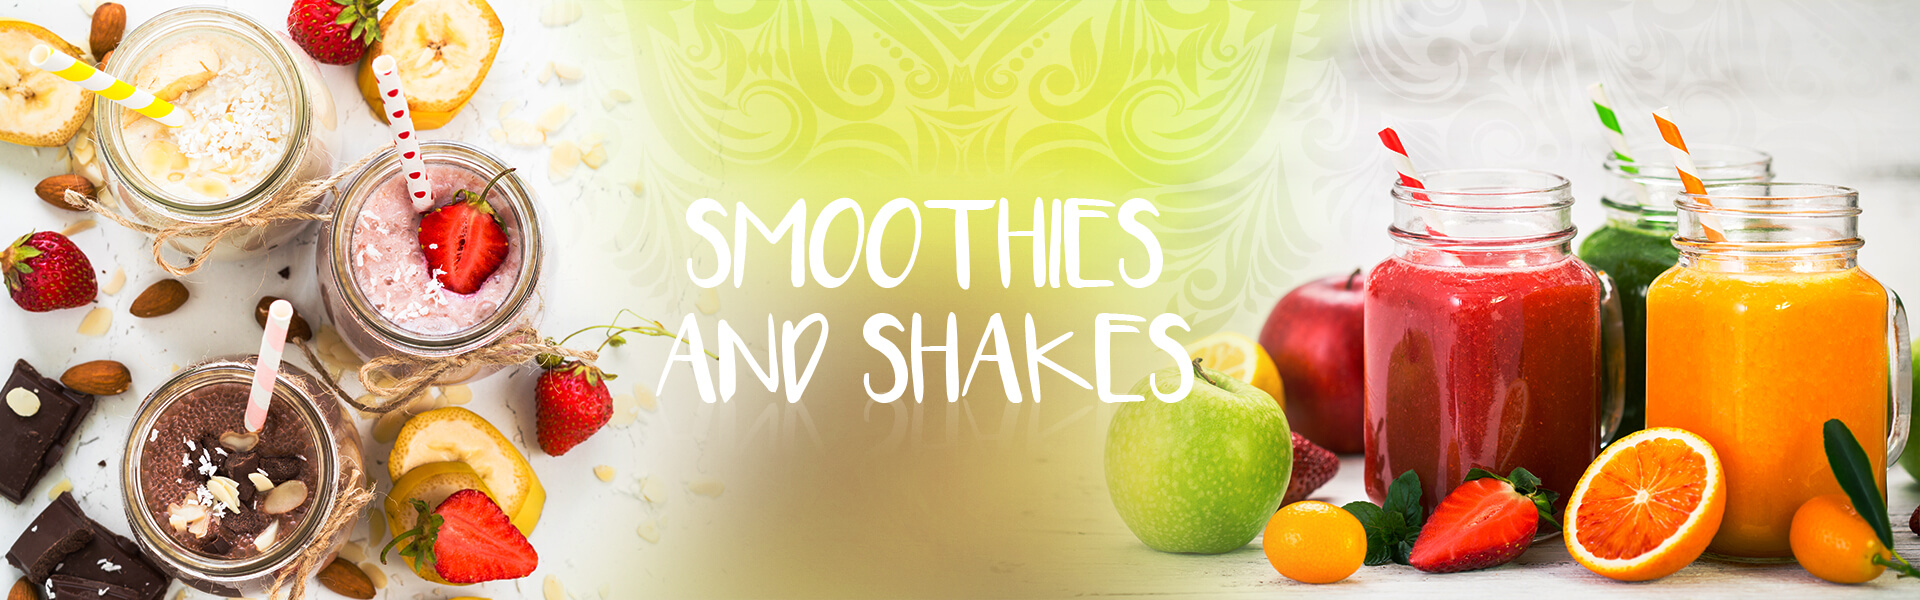 shakes and smoothies recipes 